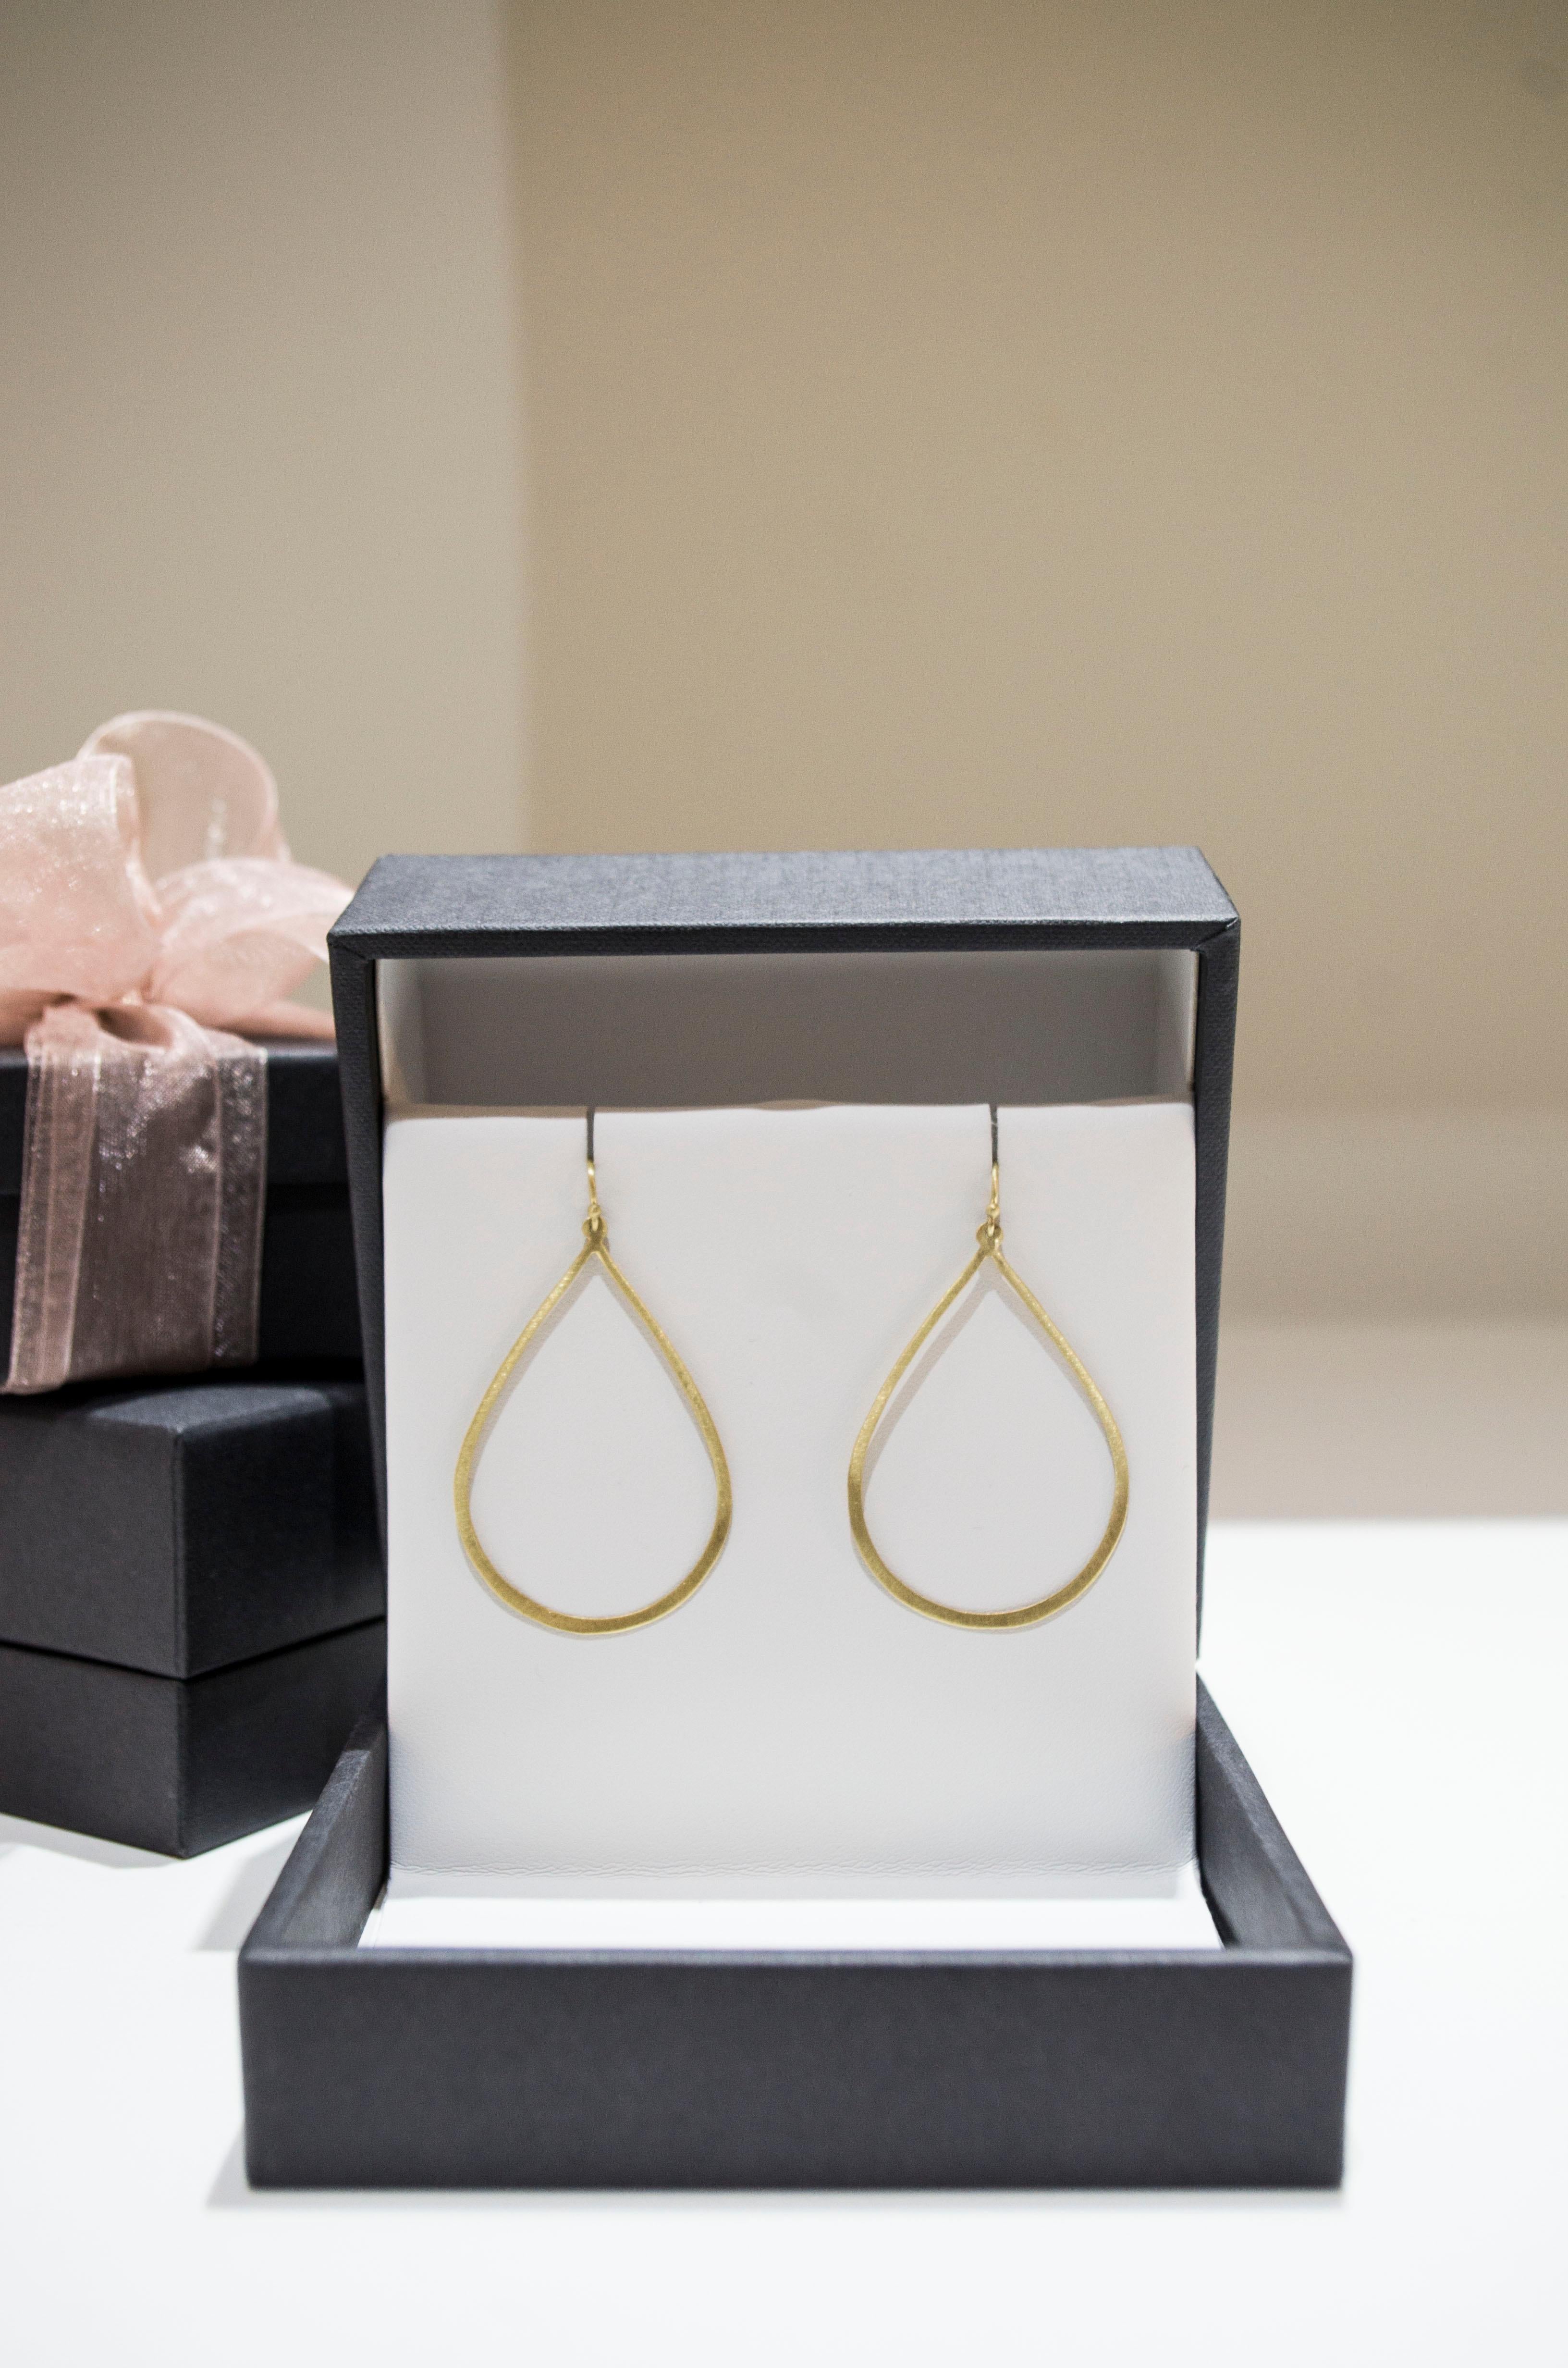 Handmade in 18k gold, the planished surface creates dimension and gives substance to these lightweight, super comfortable and easy to wear teardrop earrings.  

Length:  1.5